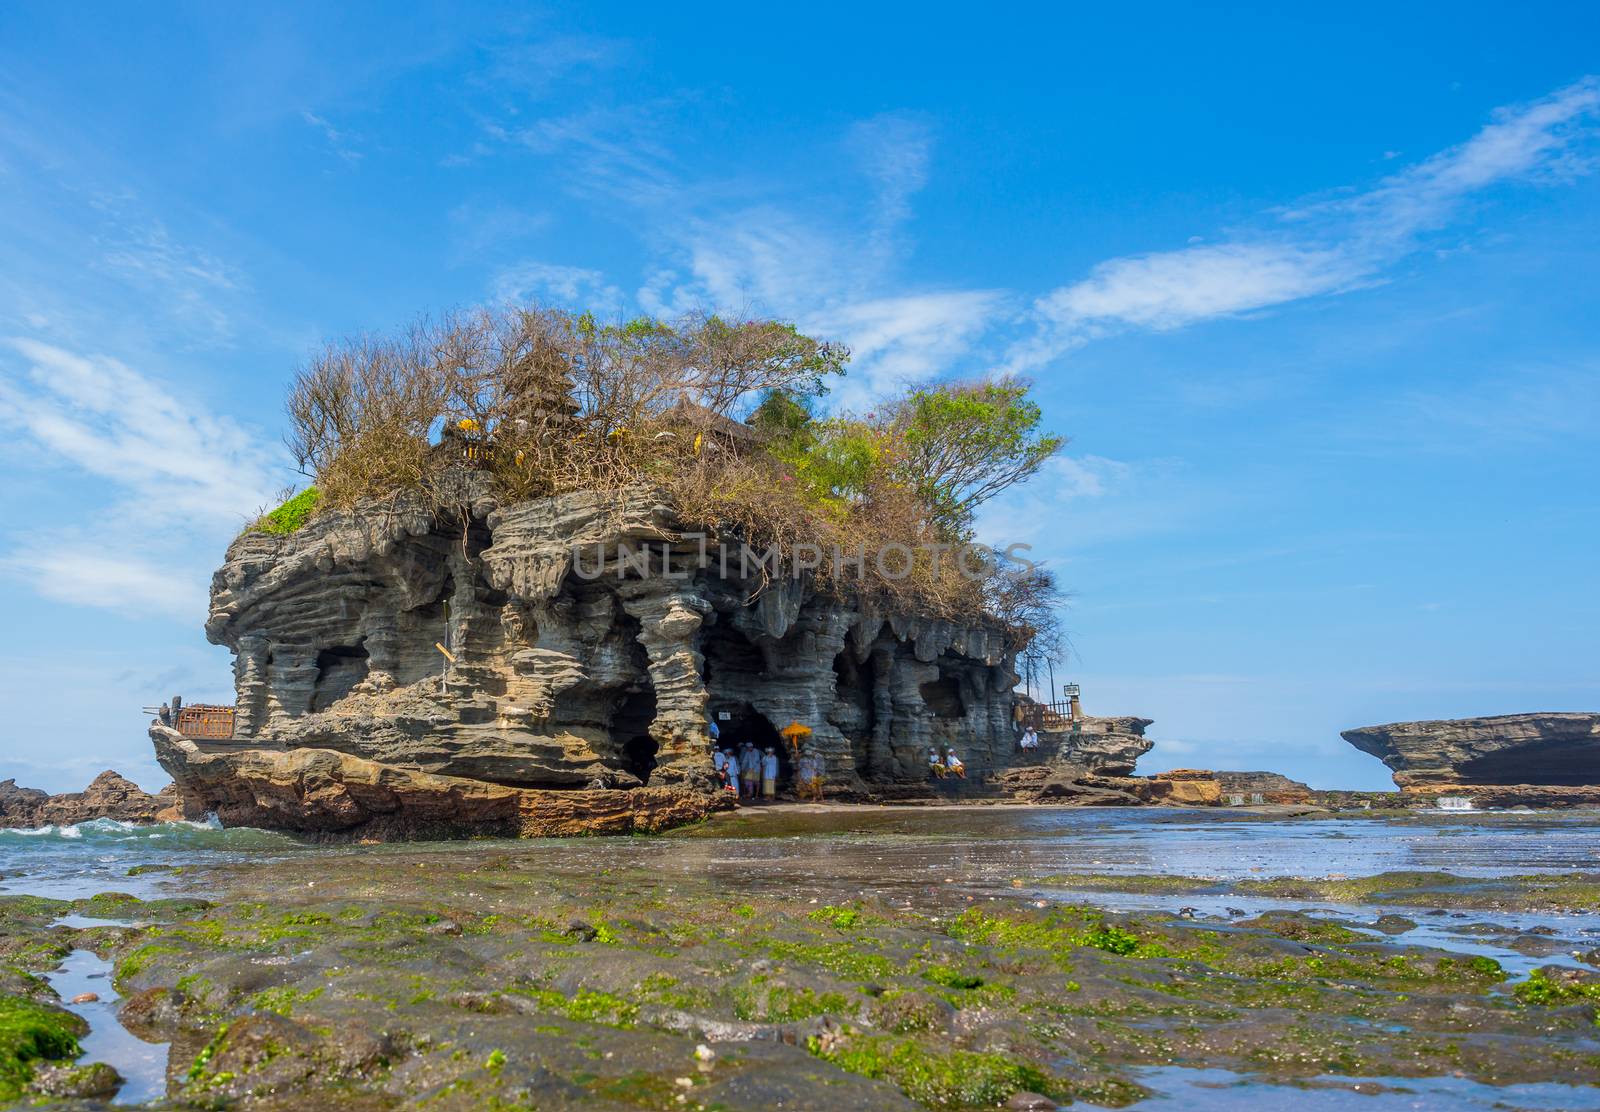 The temple "Tanah Lot" on the island of Bali, Indonesia